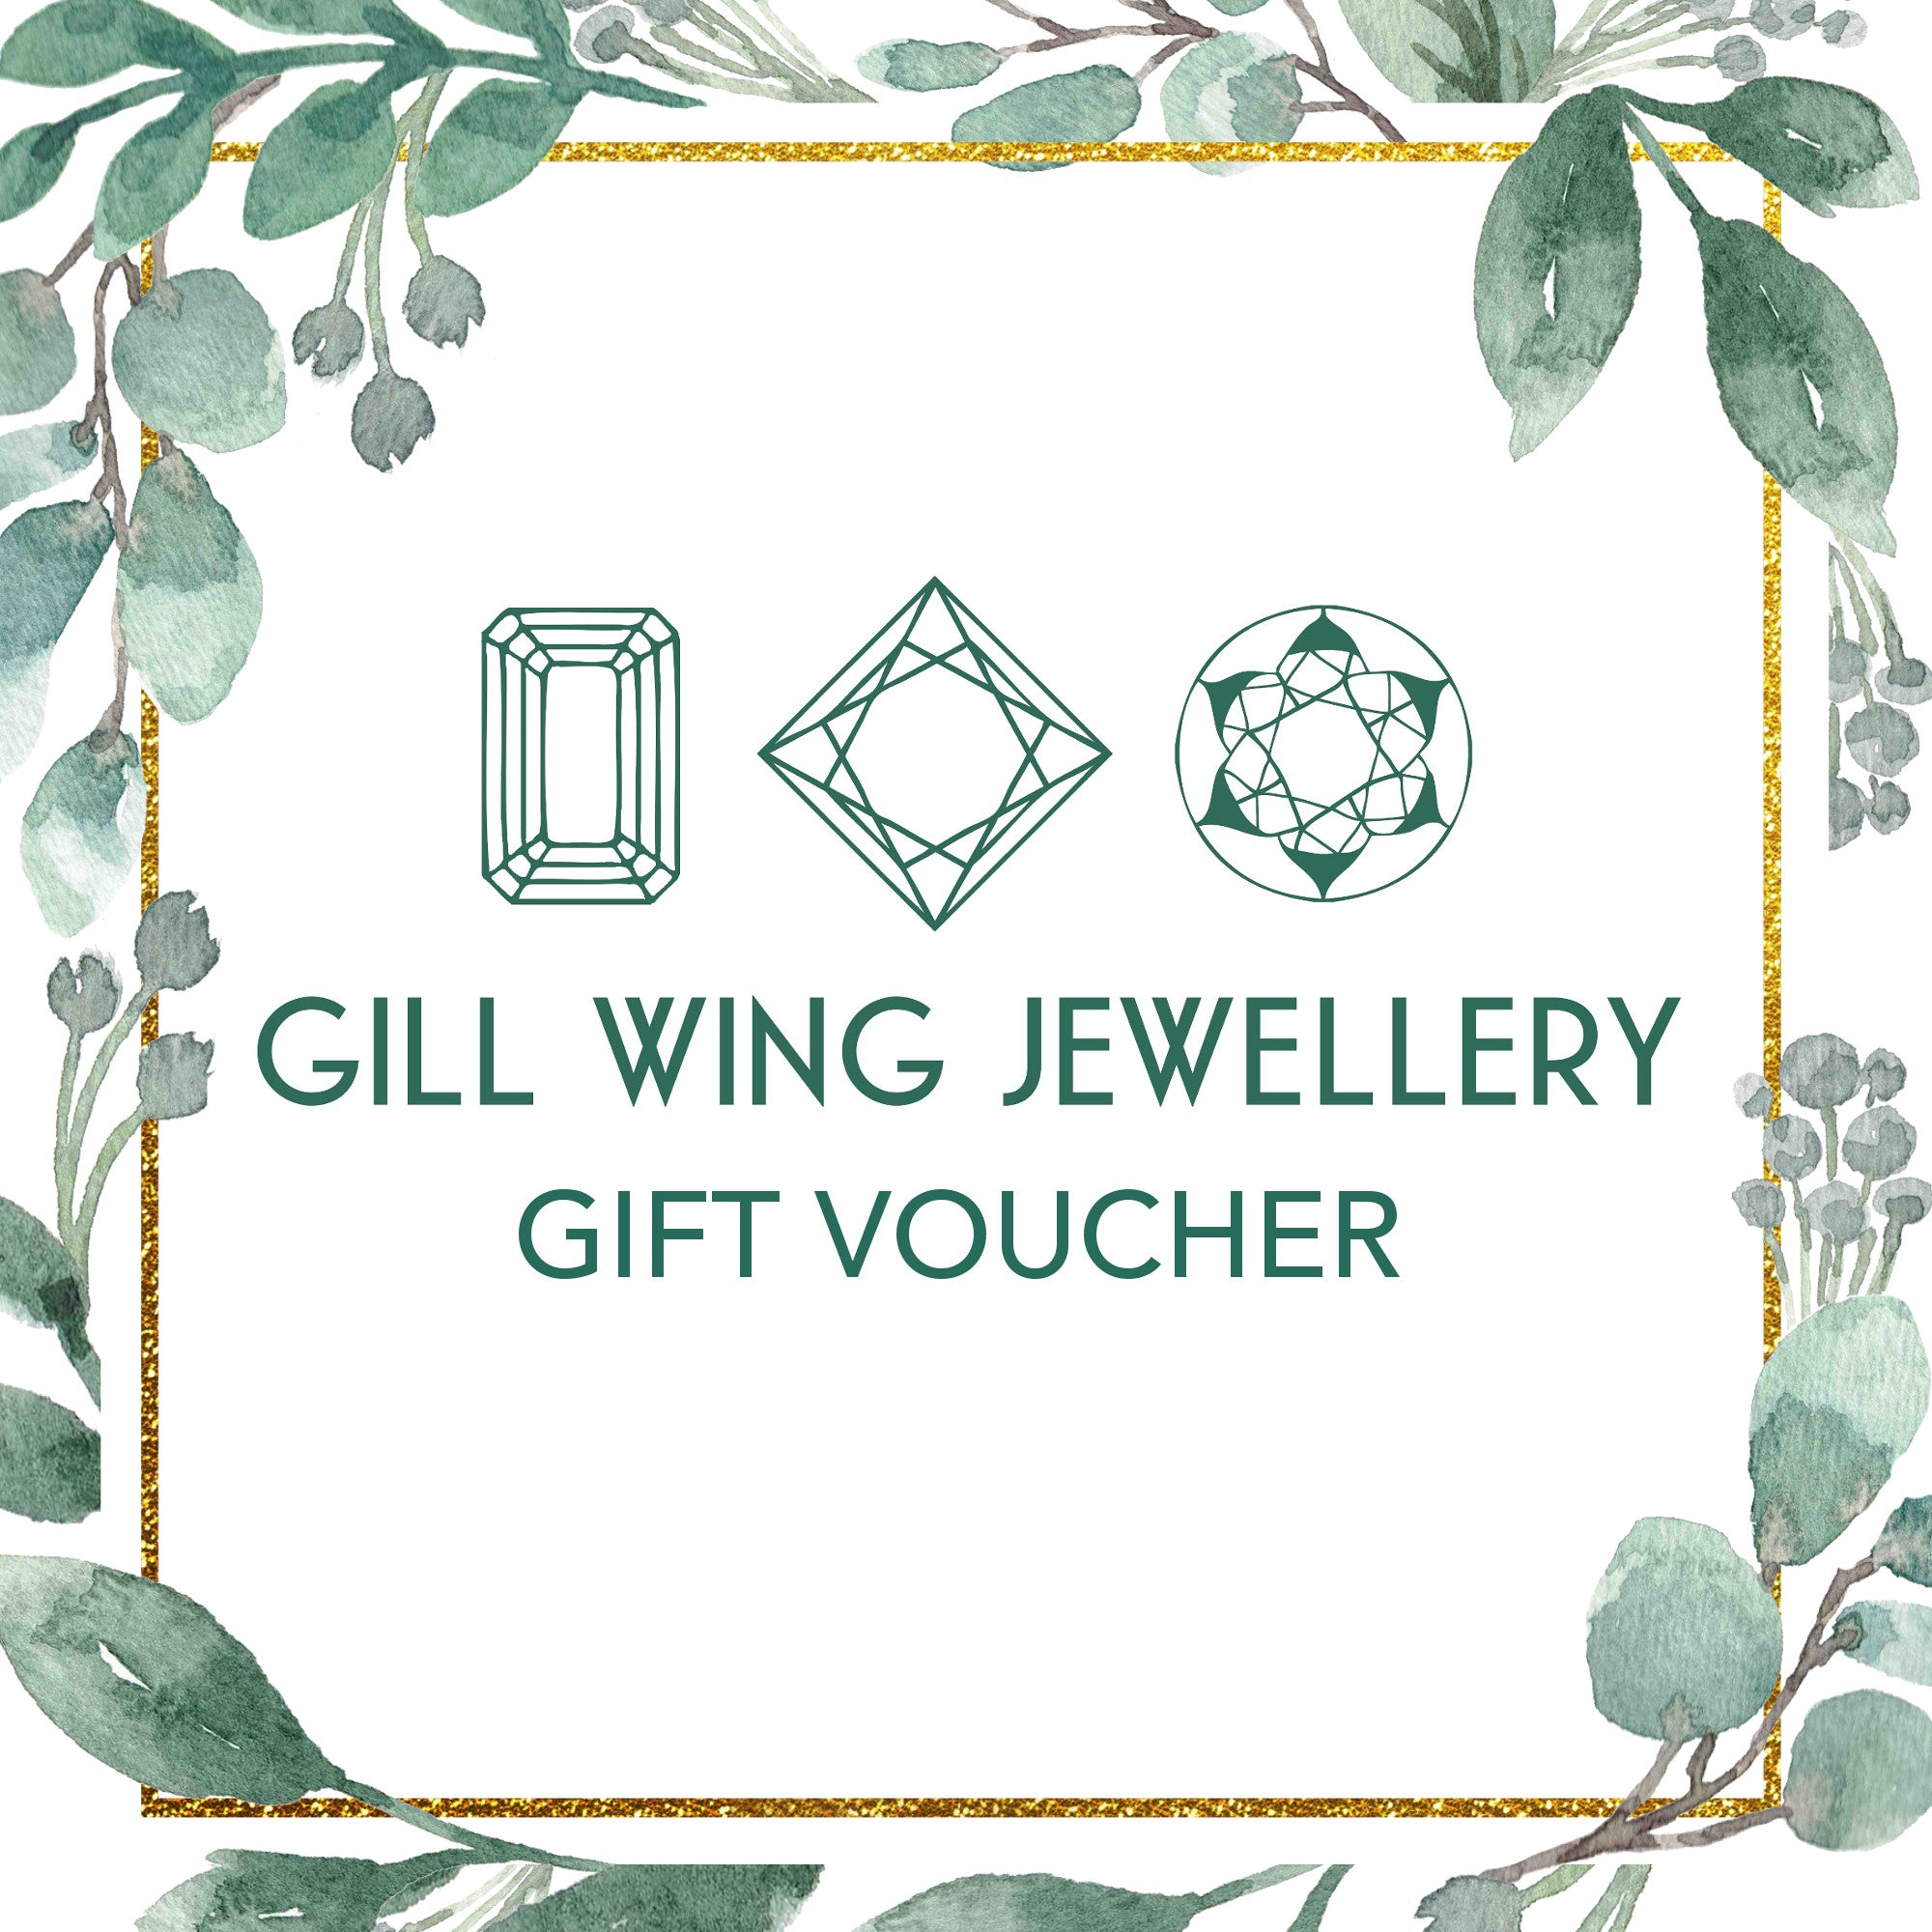 Gill Wing Jewellery Gift Voucher